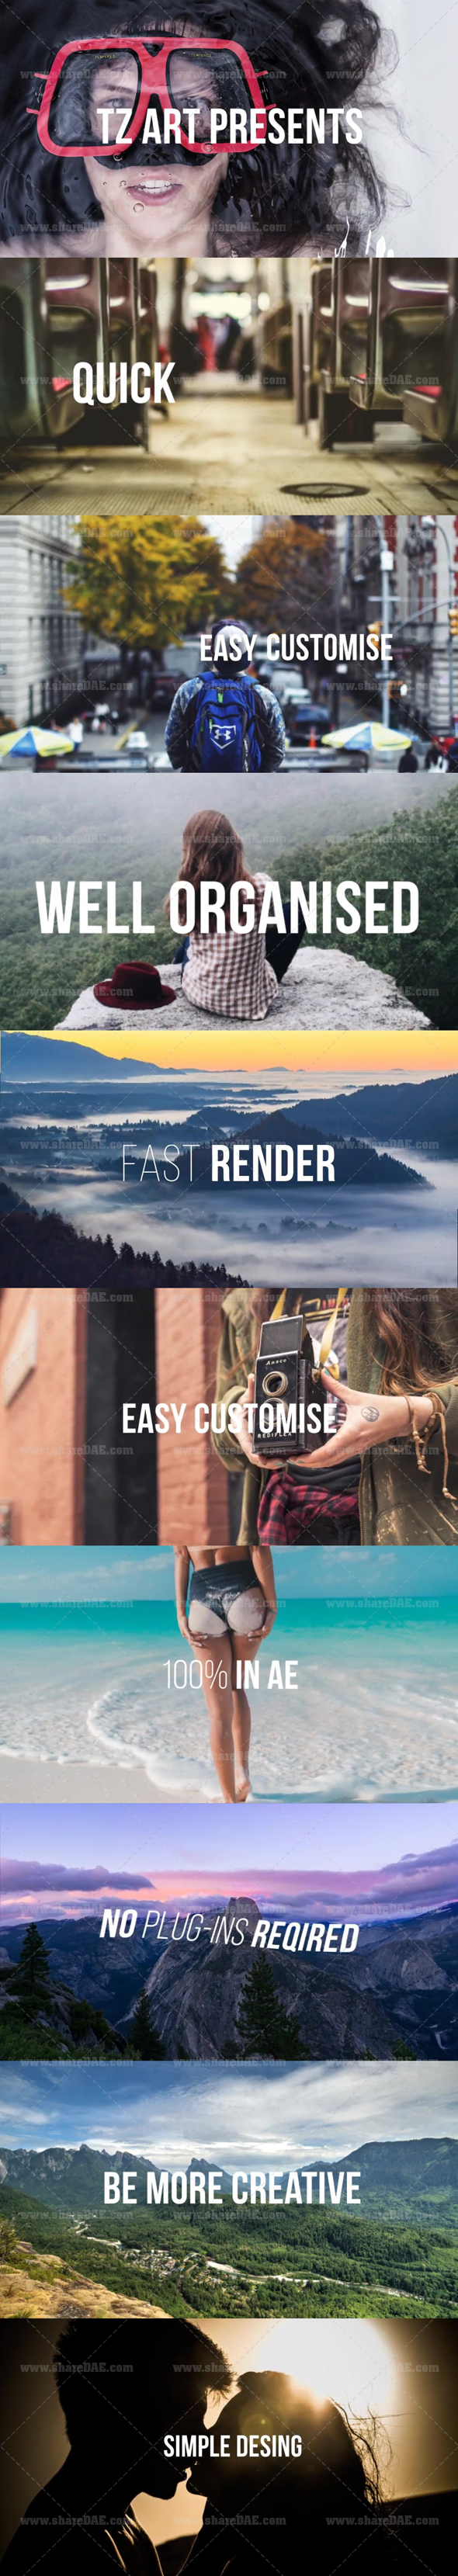 Videohive - Fast Opener 19746220 - Free Download